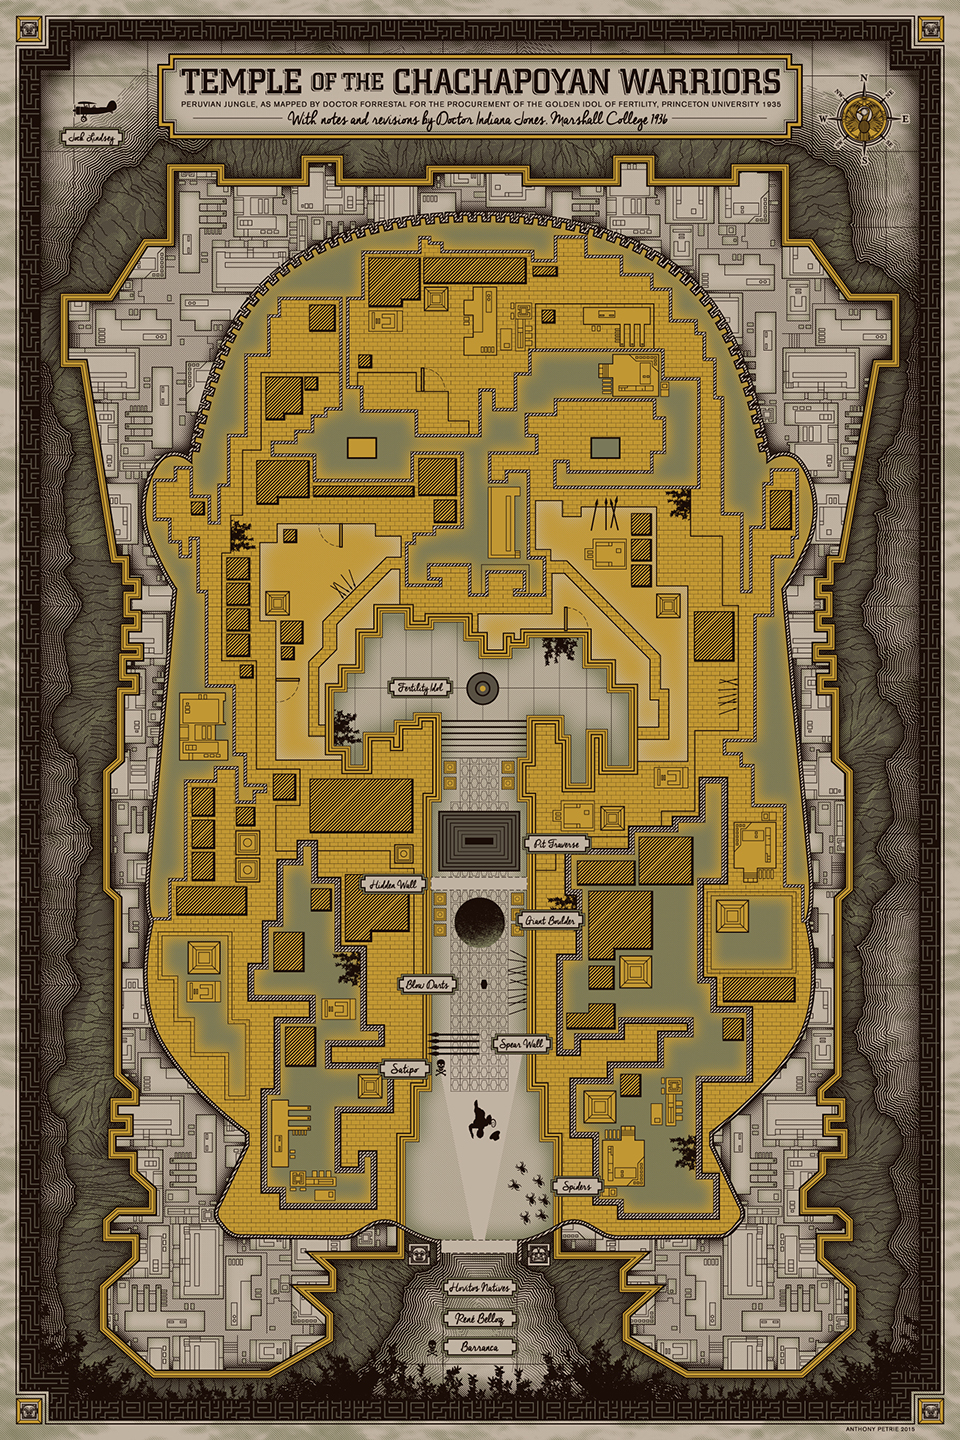 Trap Map (Raiders of the Lost Ark) by APetrie74 on DeviantArt